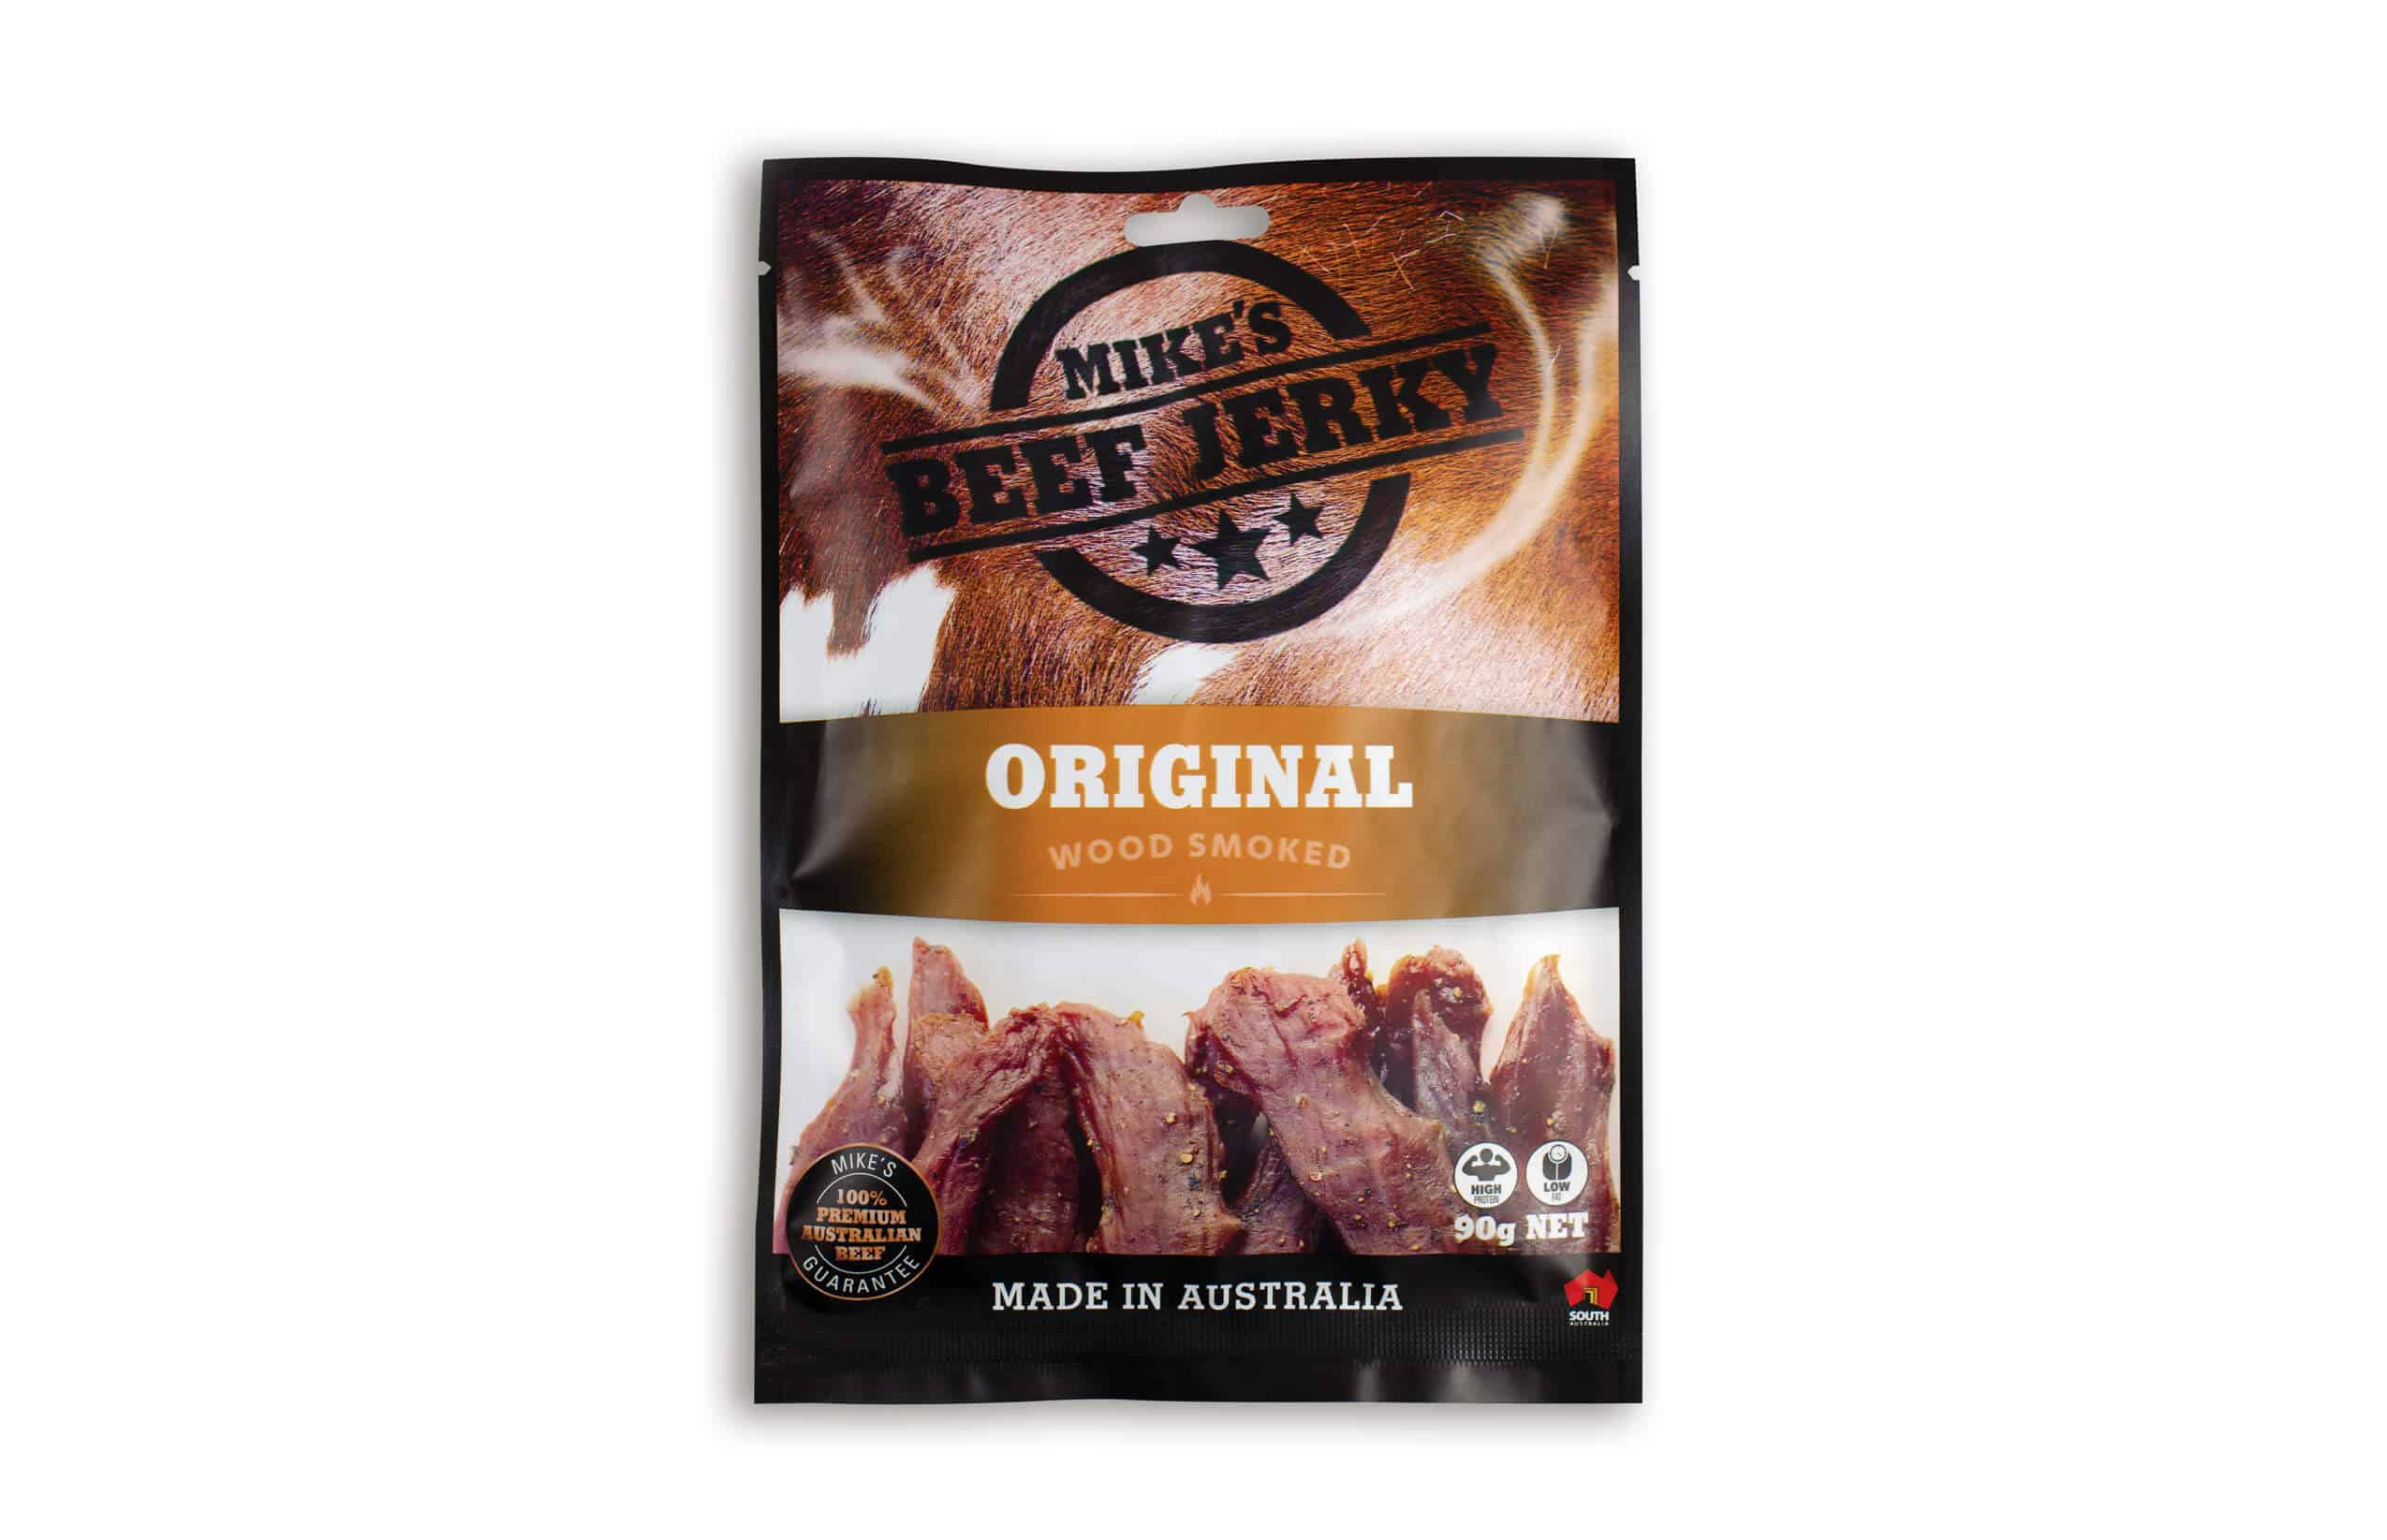 Icon Web Design Adelaide. Image of Mike's Beef Jerky Original pack.